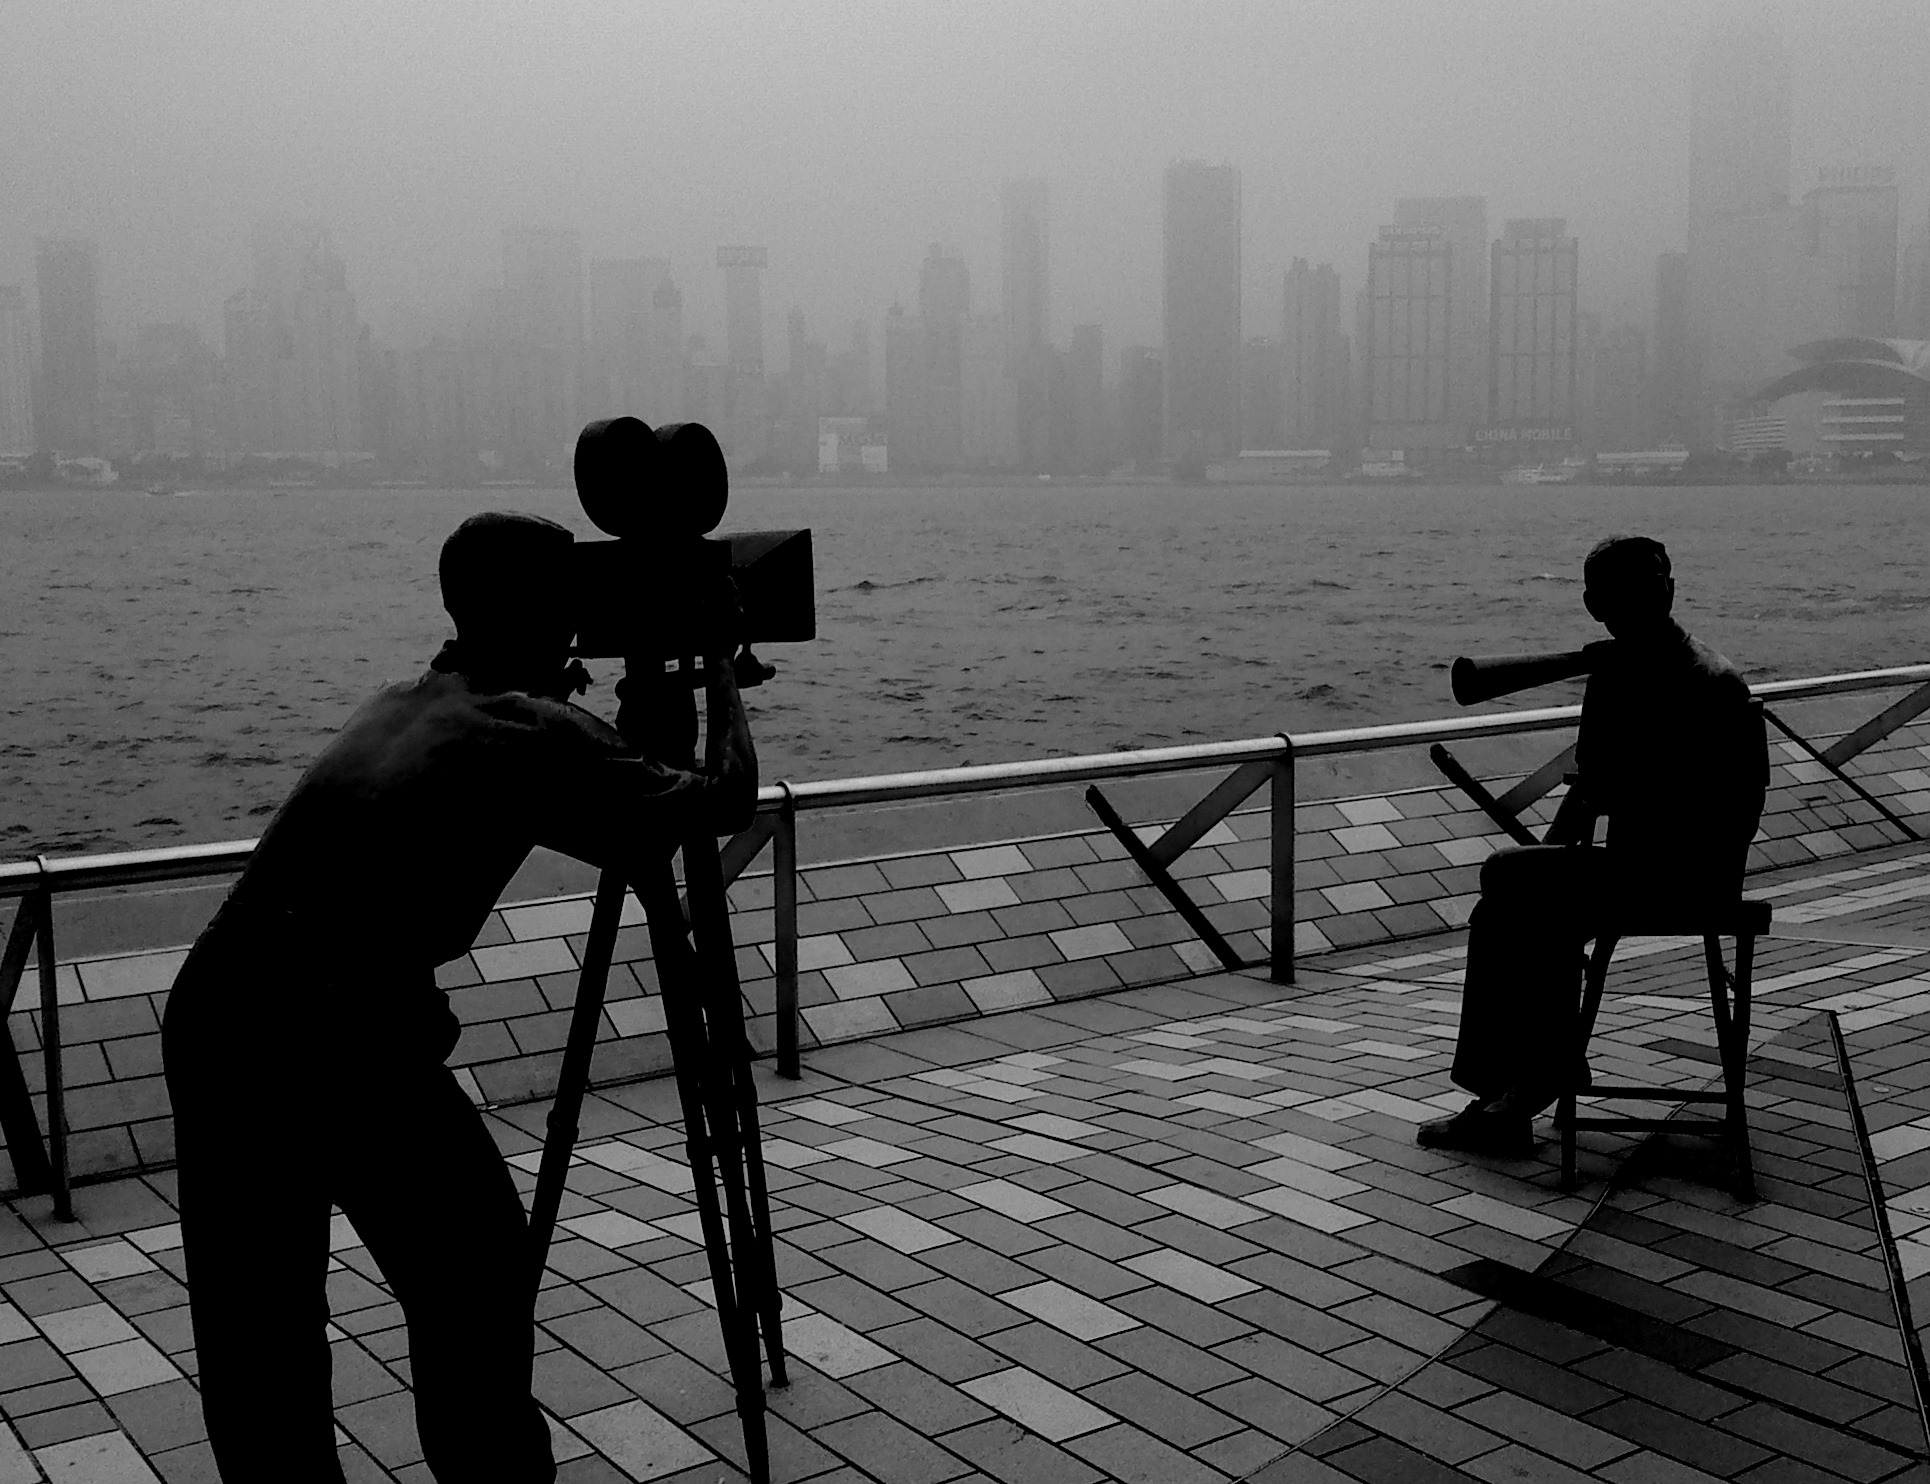 A person filming against the backdrop of a misty city